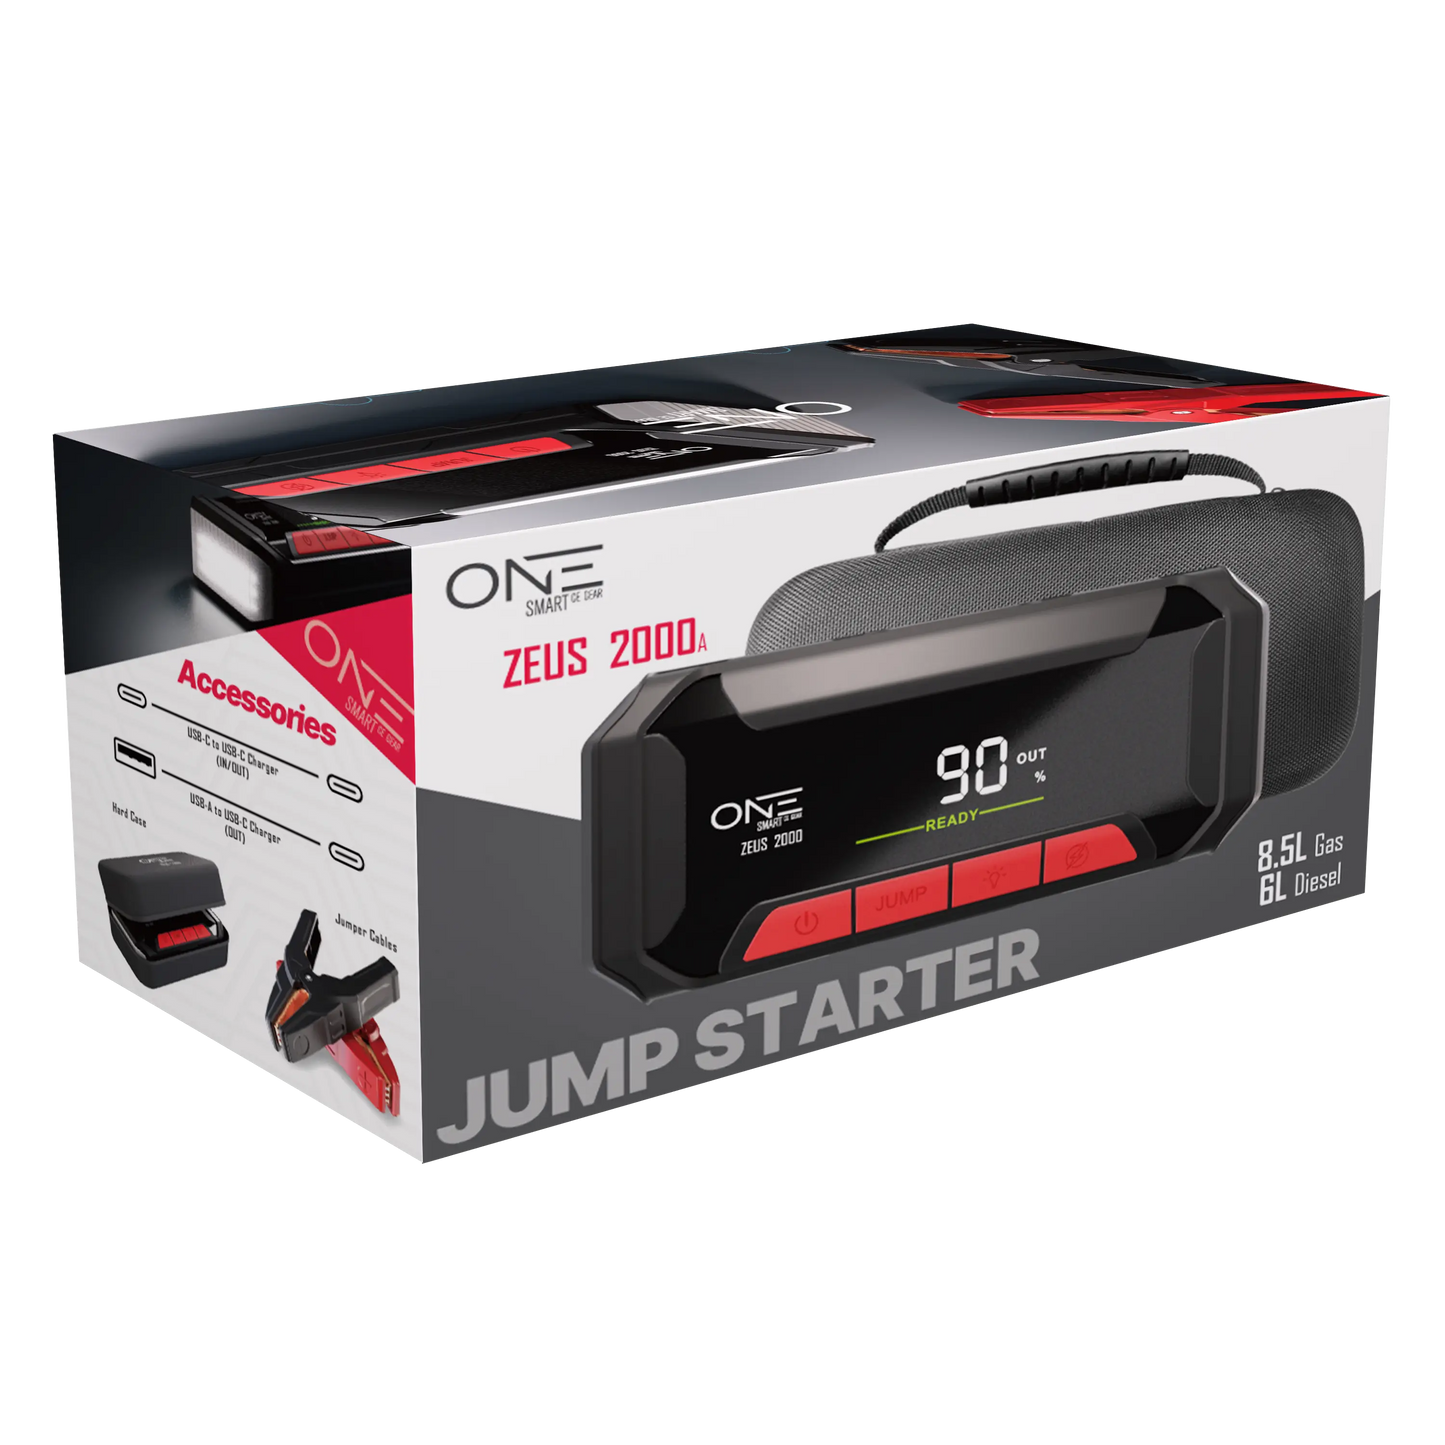 ONE Jump Starter 2000A Peak Battery Pack, Ultrasafe Car Battery Jumpstarter, 12V Jump Box for Battery up to 8.5L Gas/6L Diesel Engine, Battery Booster 65W Fast Charger, Portable Hard Case/Dust Tight